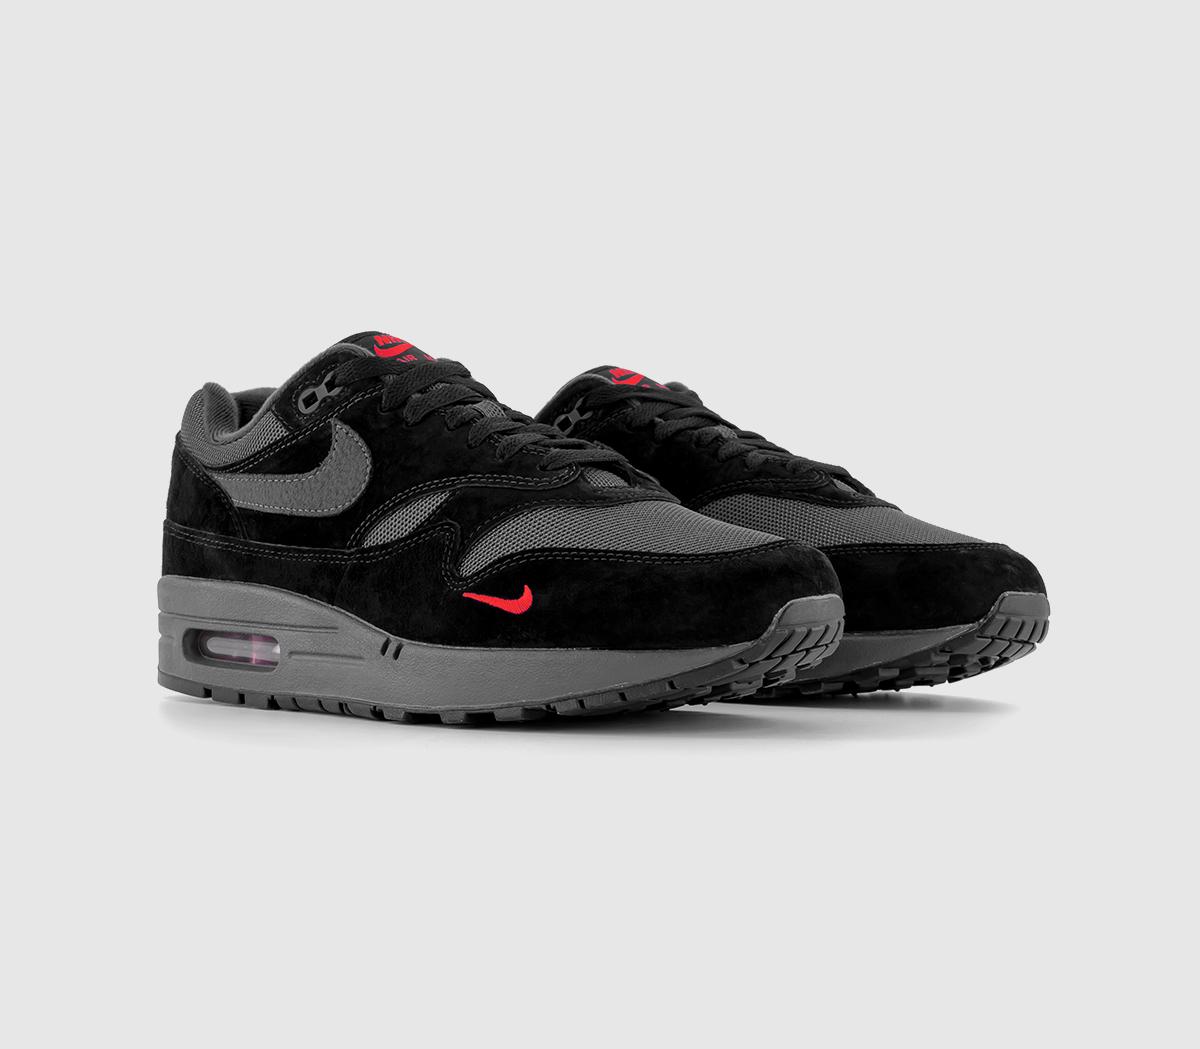 Nike Air Max 1 Trainers Black Anthracite University Red, 6